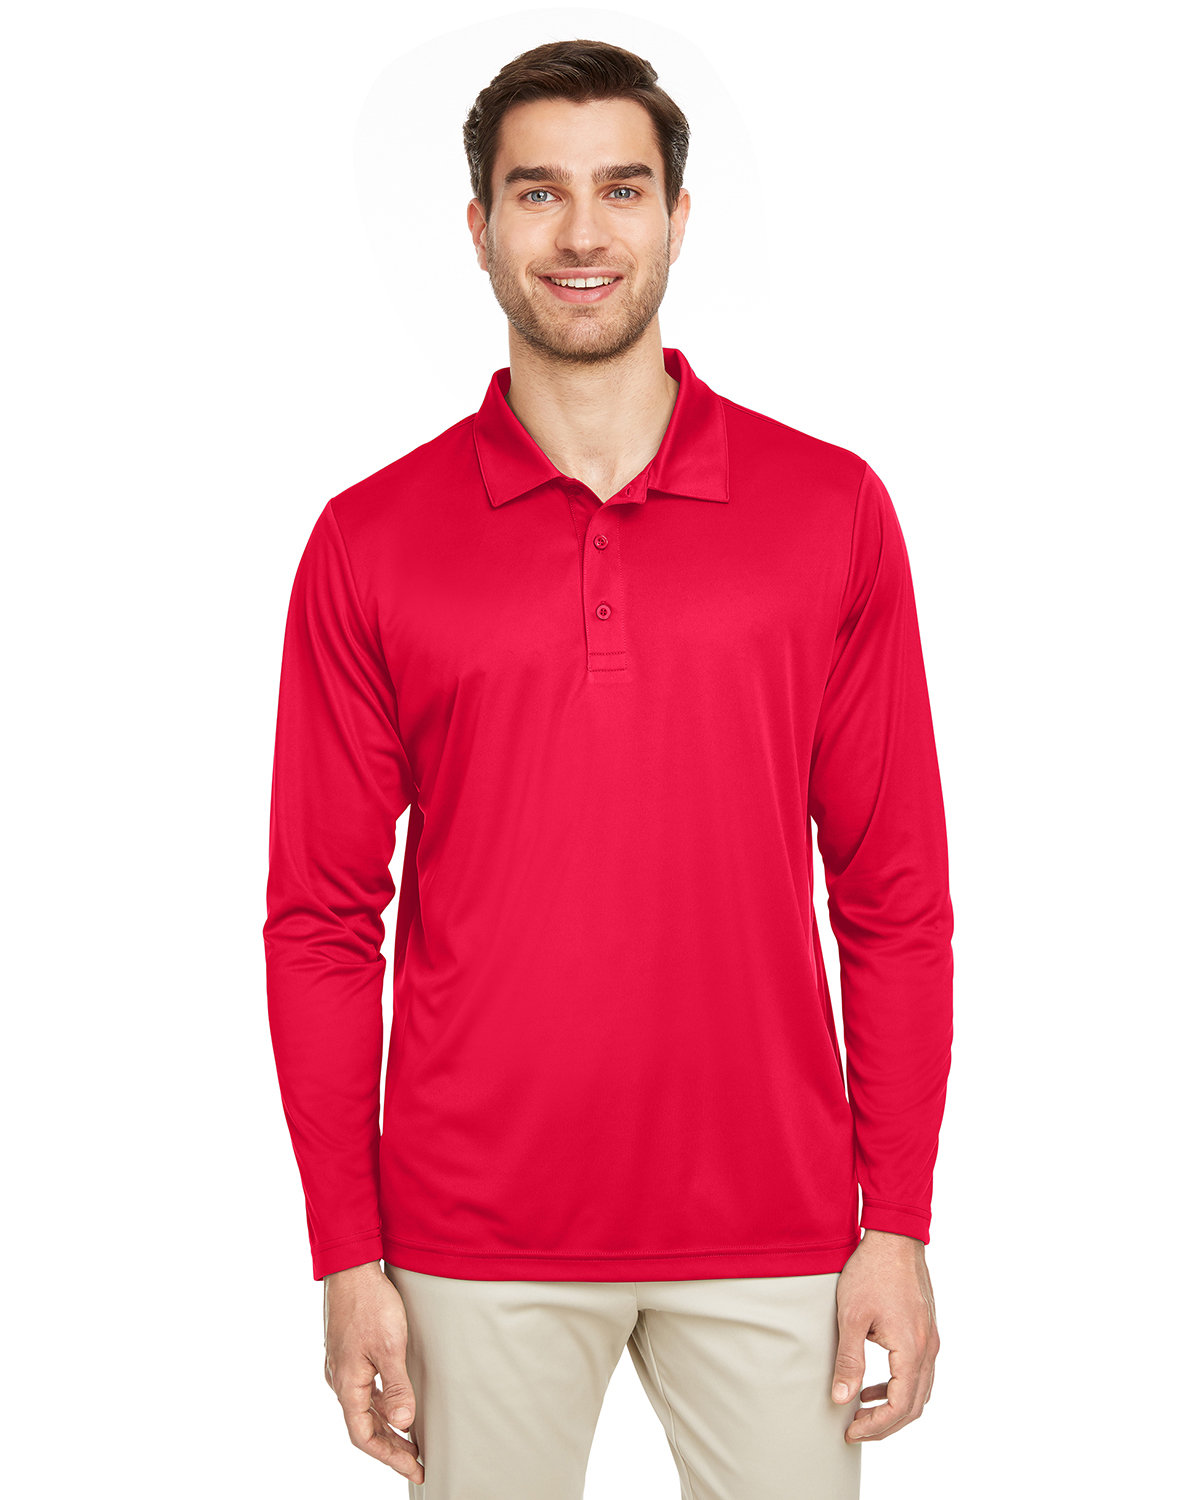 Team 365 Men's Zone Performance Long Sleeve Polo SPORT RED 